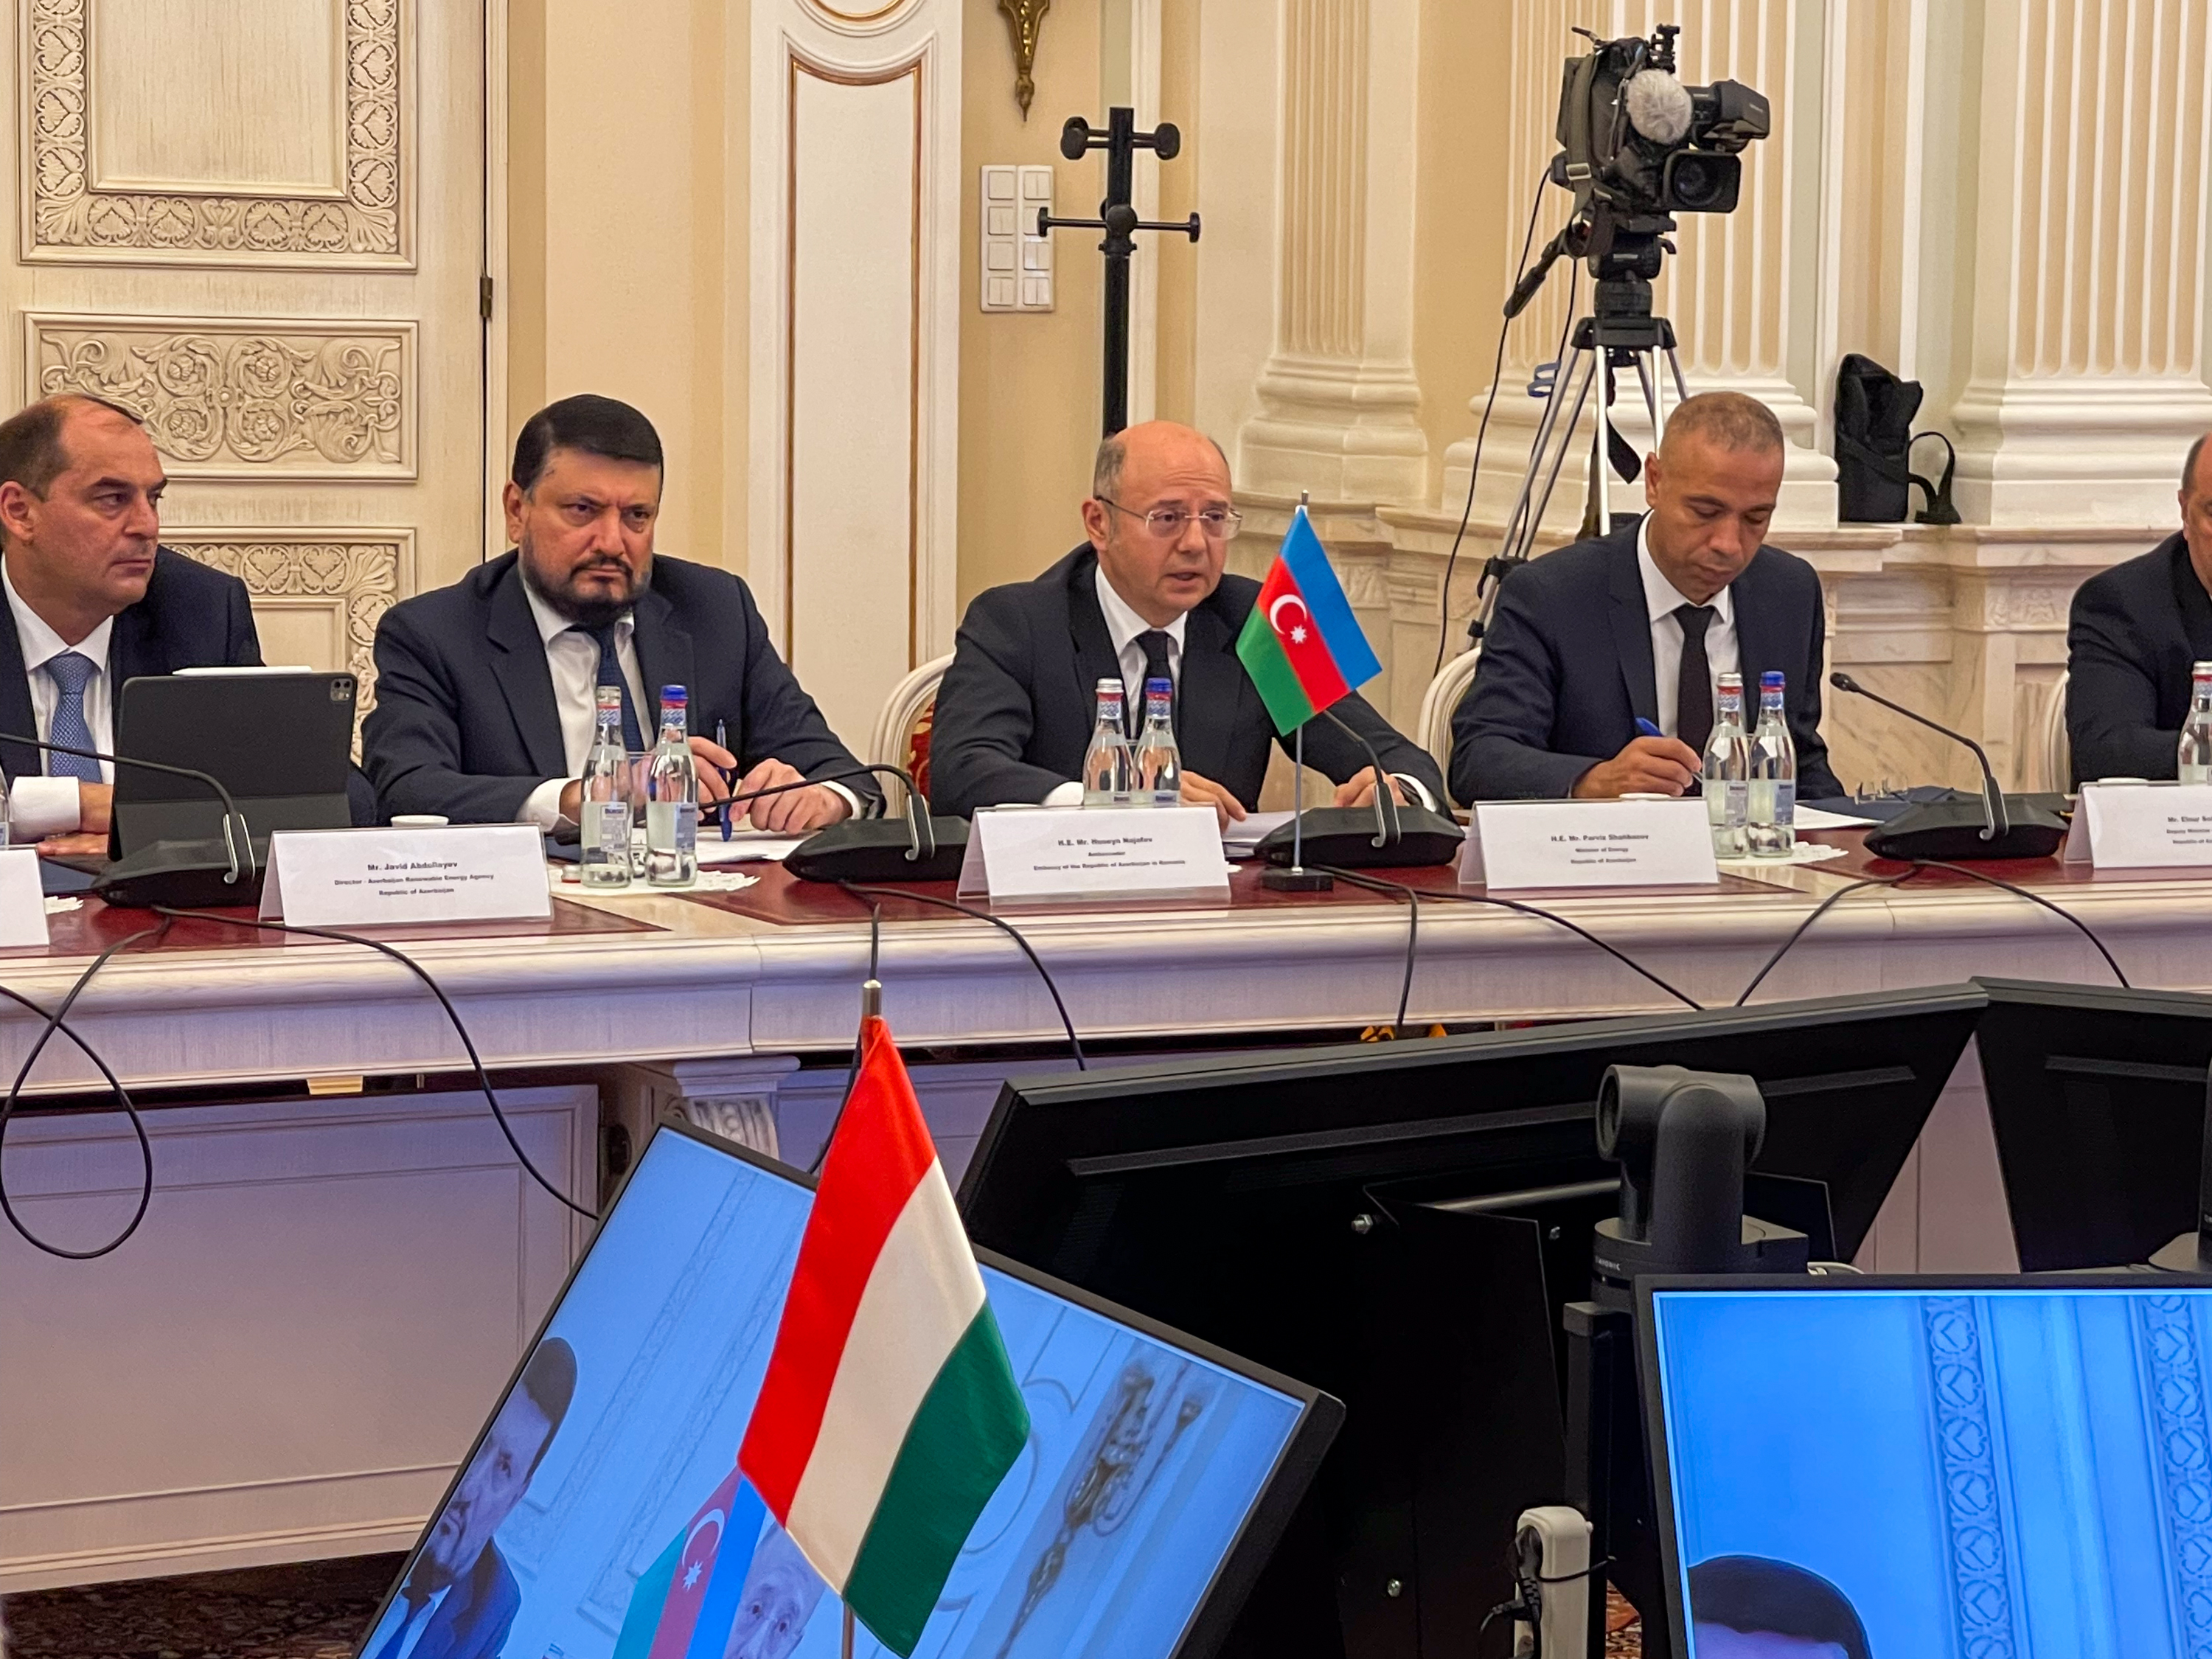 Bucharest hosted the fourth Ministerial Meeting on green energy development and transmission